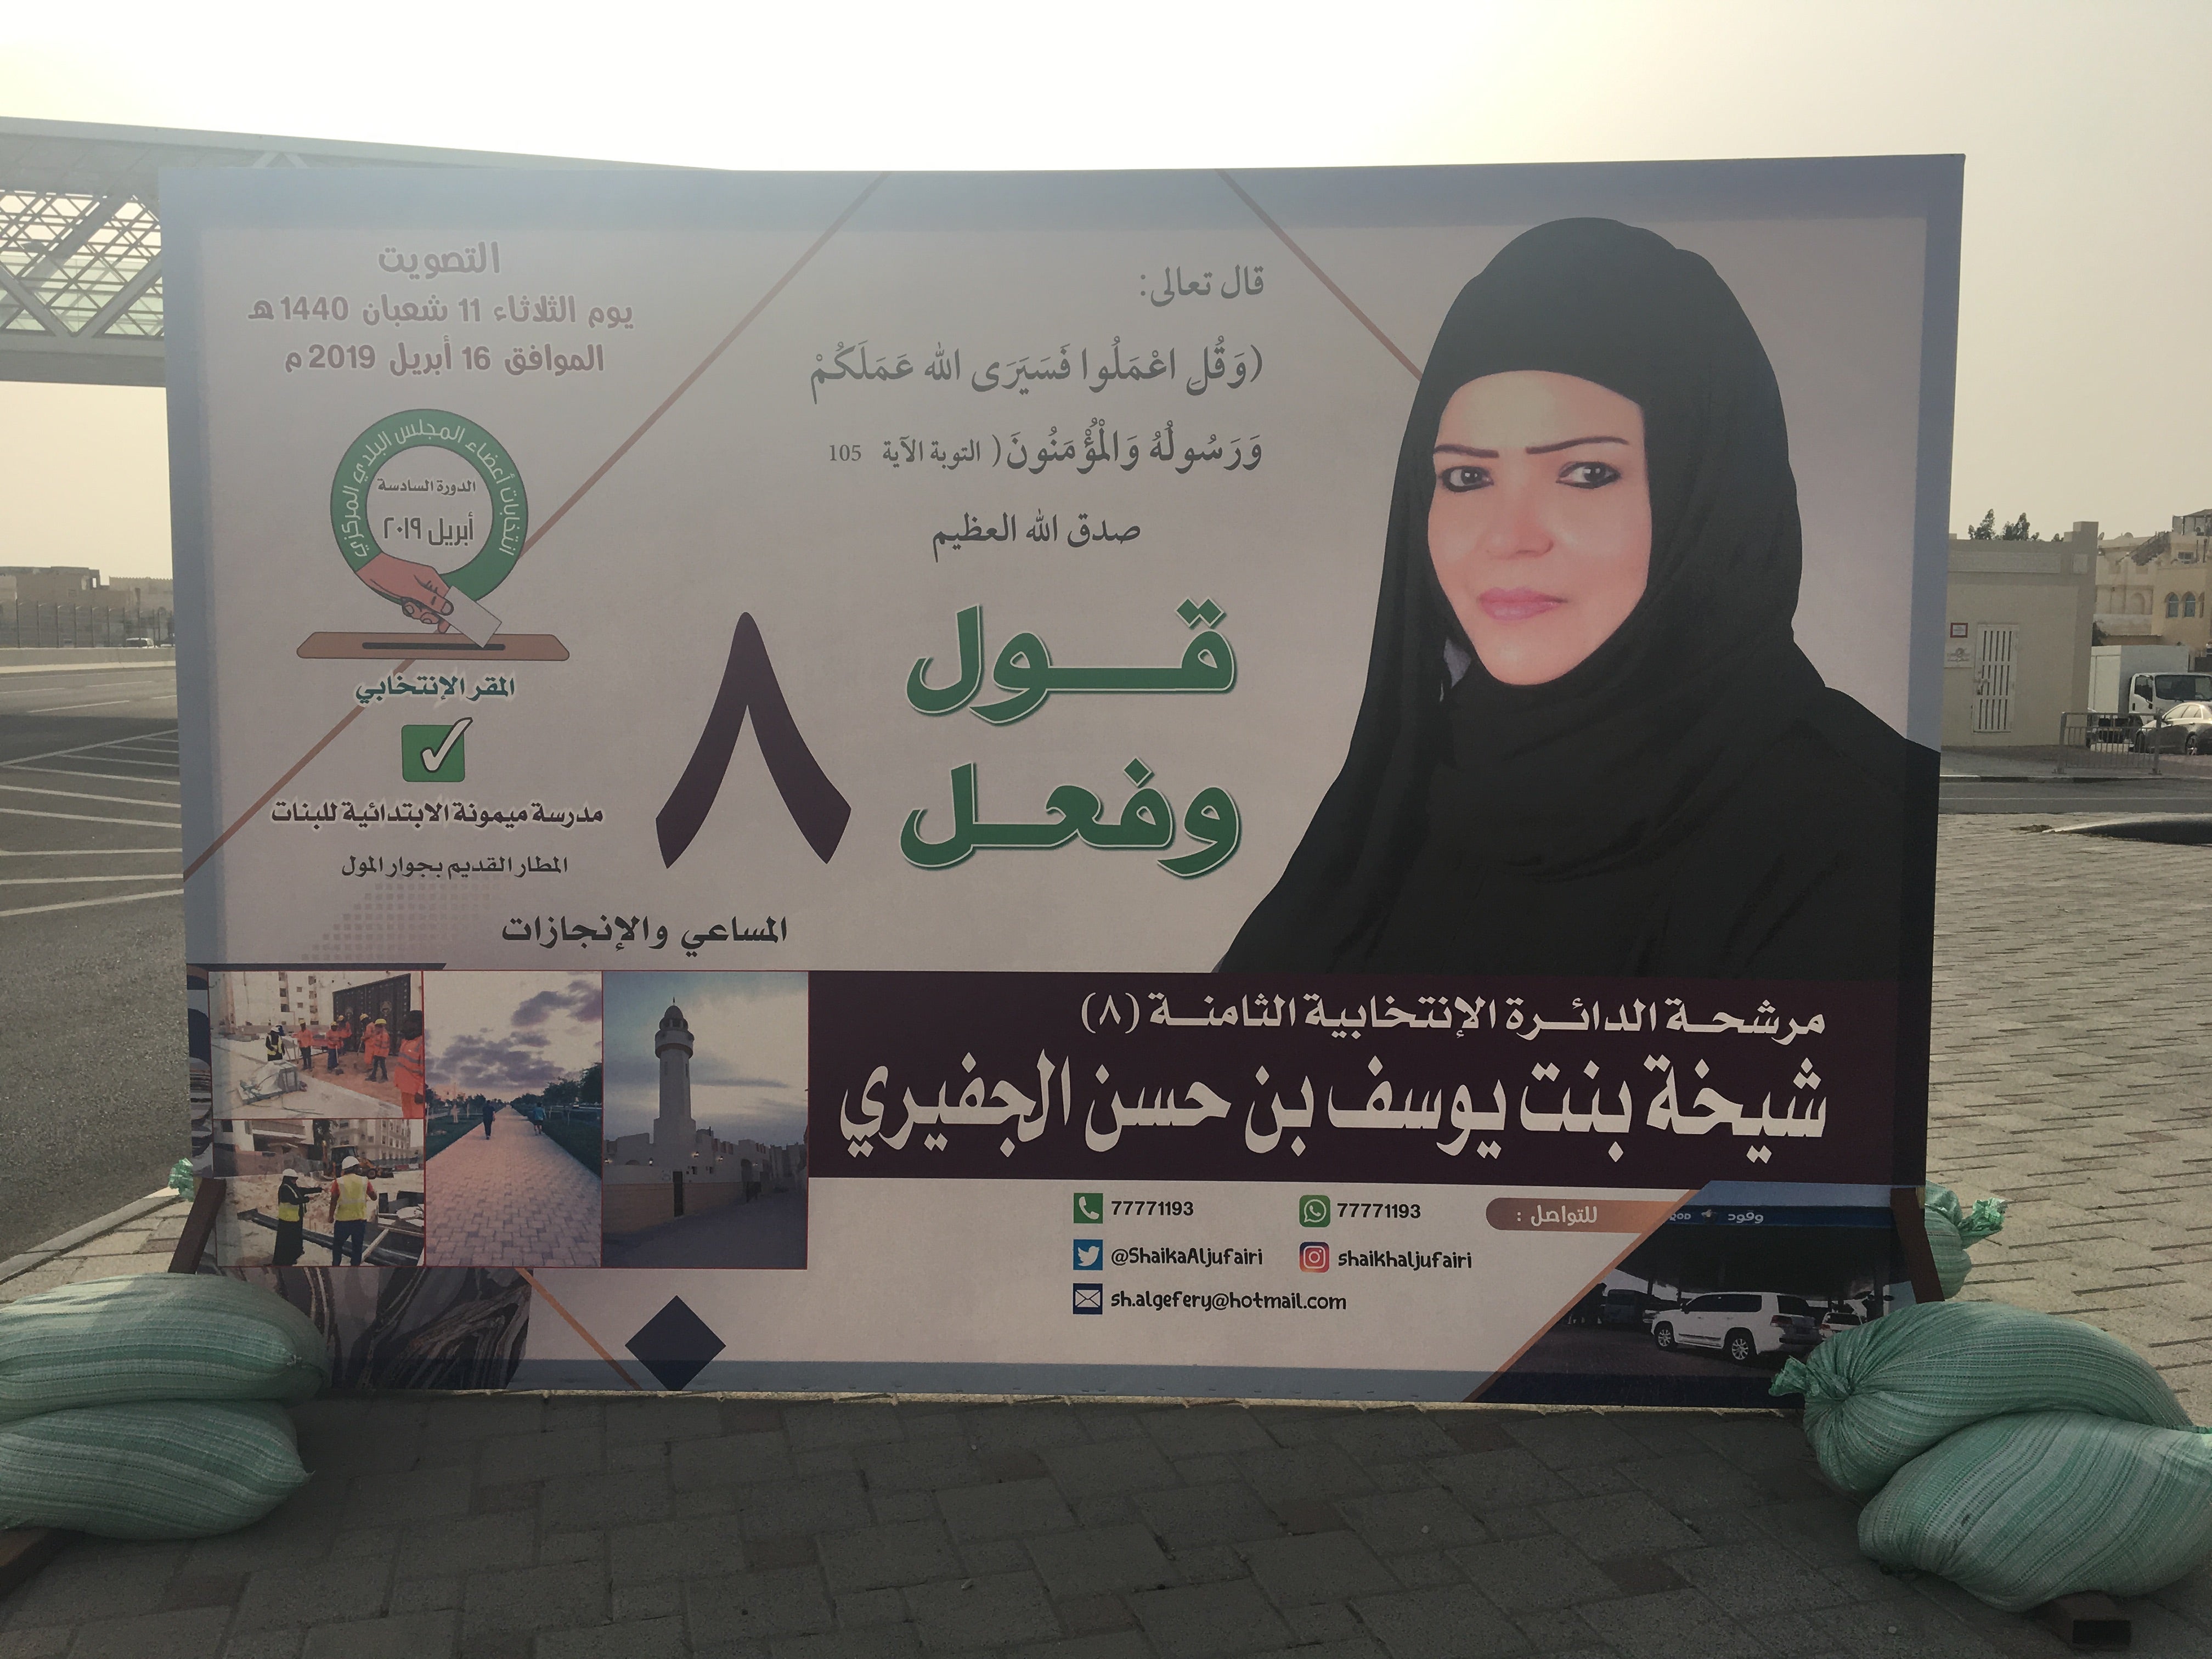 A Qatar council election campaign poster in Doha in 2019